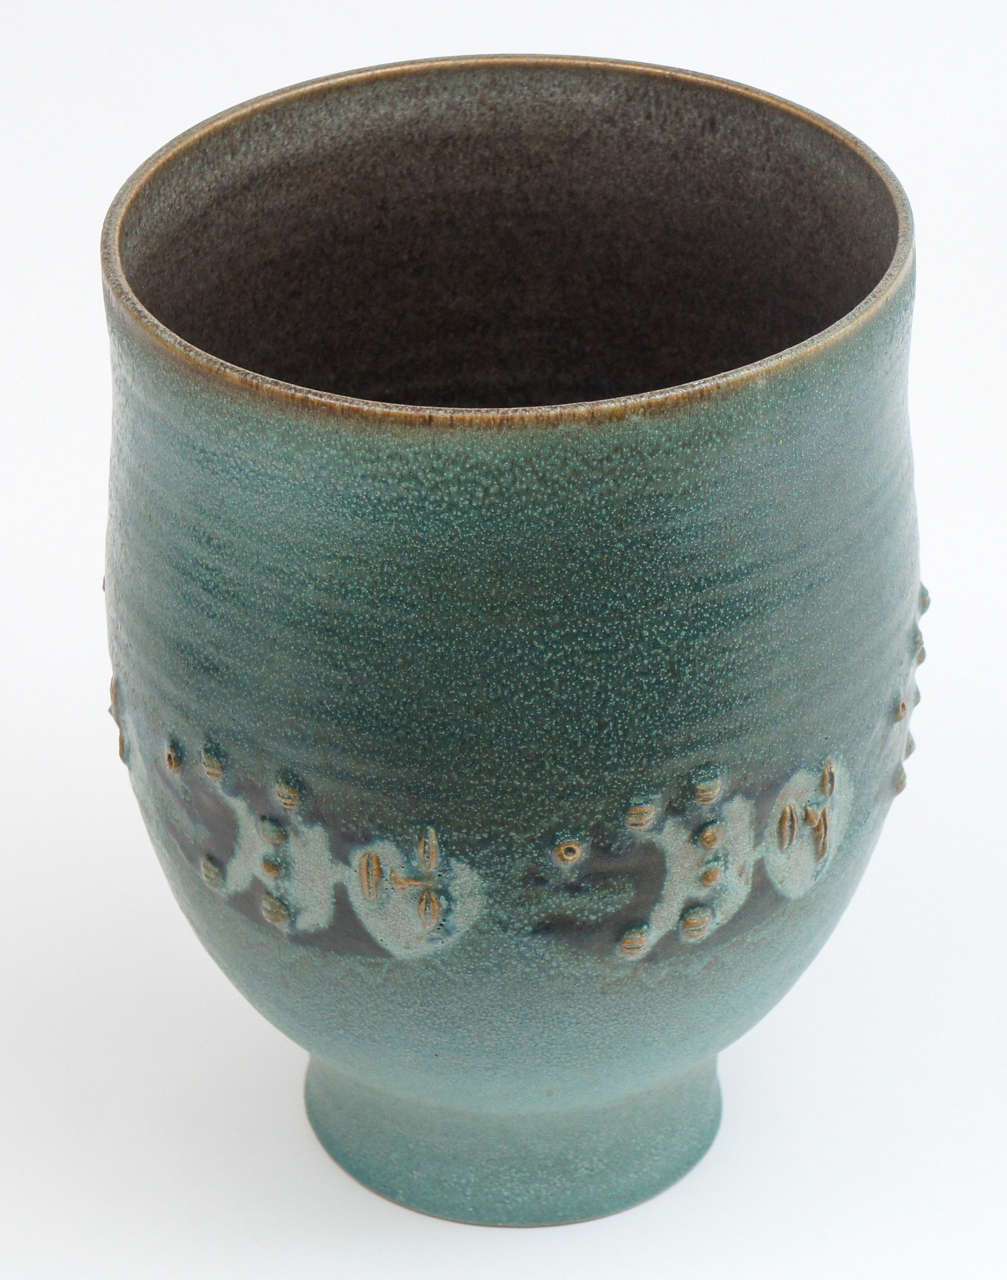 Dramatic piece by Edwin and Mary Scheier, important studio potters of the 20th century. This highly stylized creation is in a soft. Muted green adorned with raised figures around the central portion. This piece is signed and special!